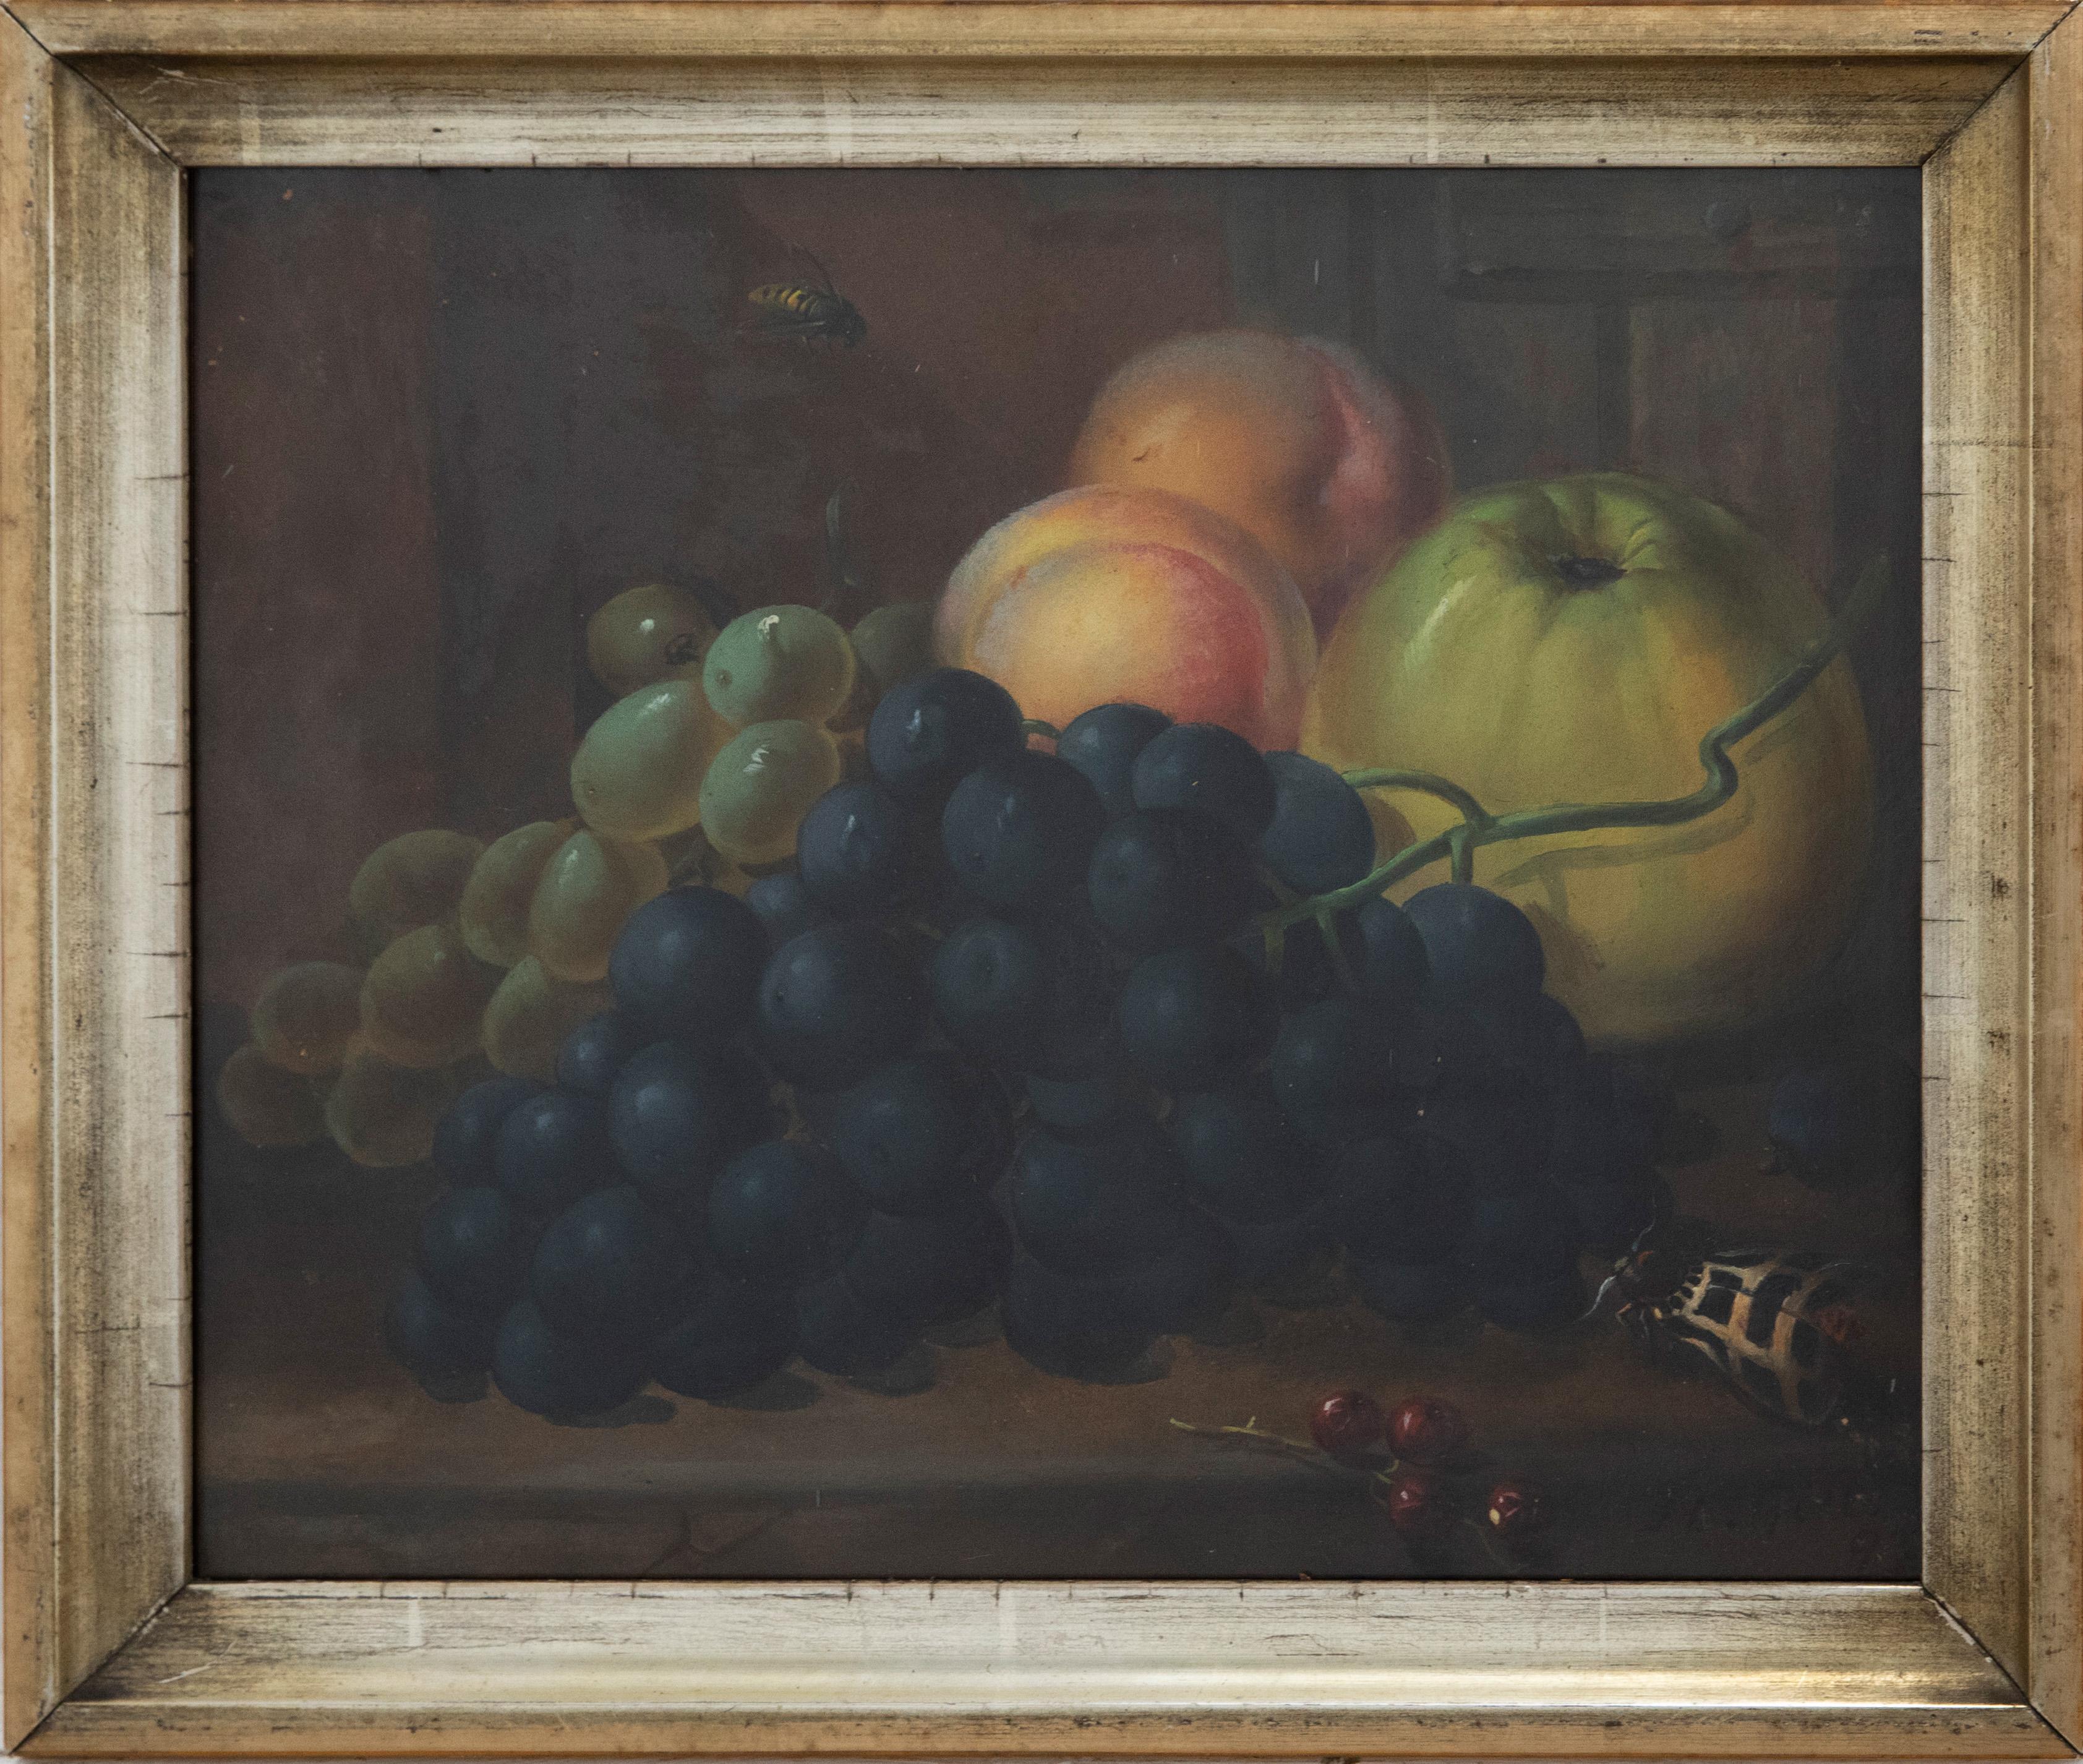 A particularly fine 19th century still life of green and black grapes, with a large cooking apple and sweet nectarines. A creeping moth and hovering wasp bring a Dutch master feel to the well paint oil. Signed and dated to the lower right. Presented